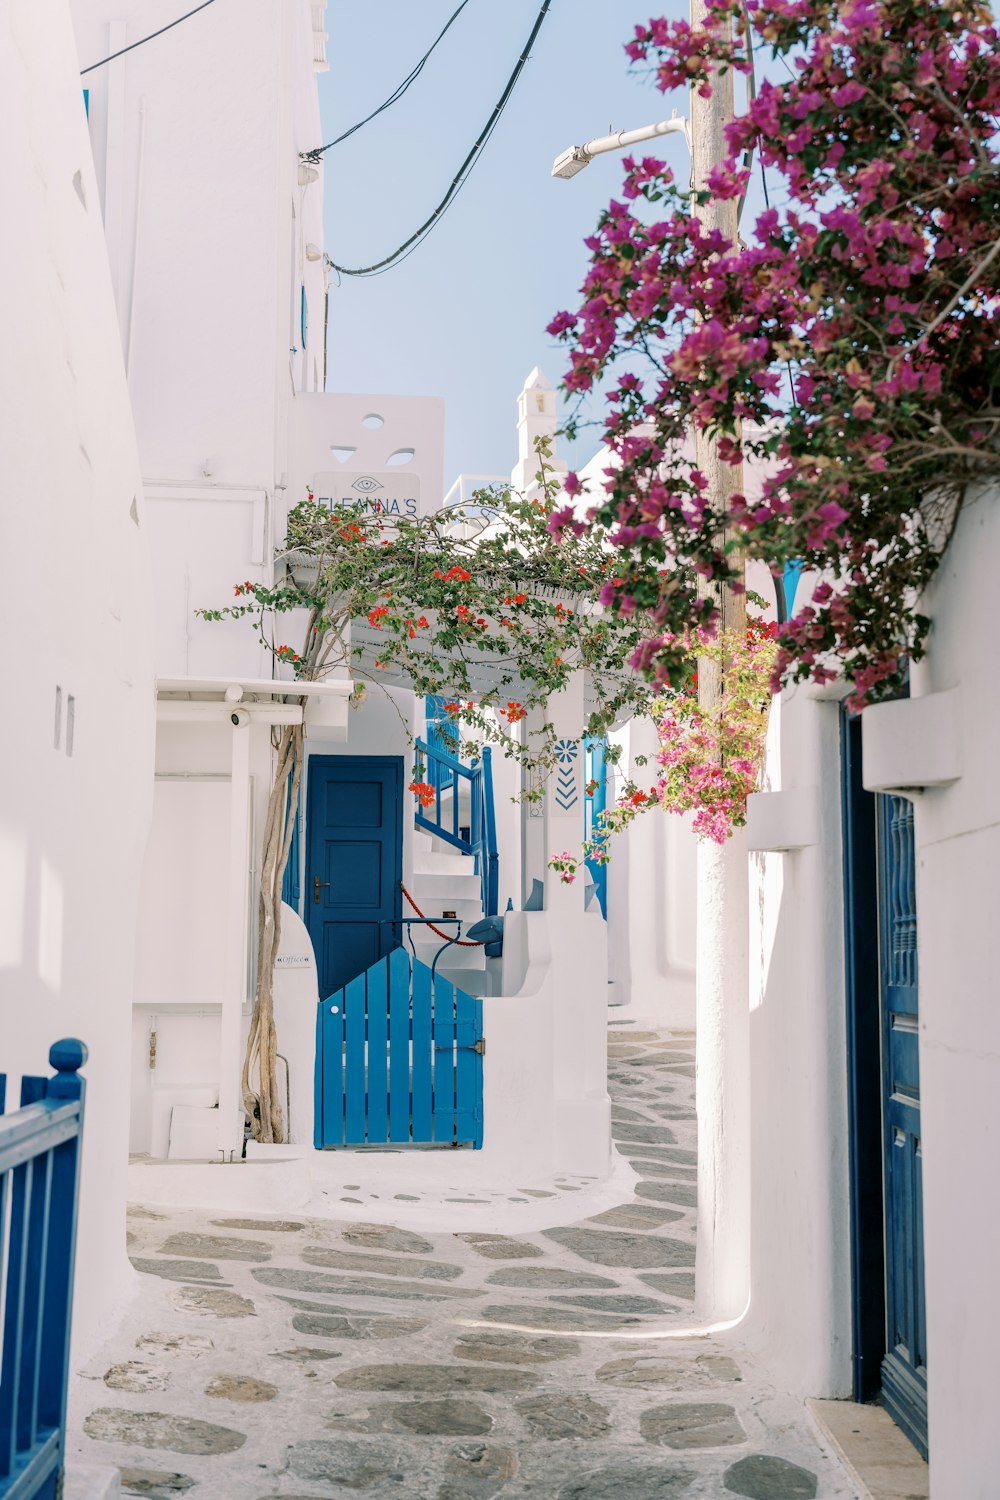 a narrow street with white buildings and blue doors